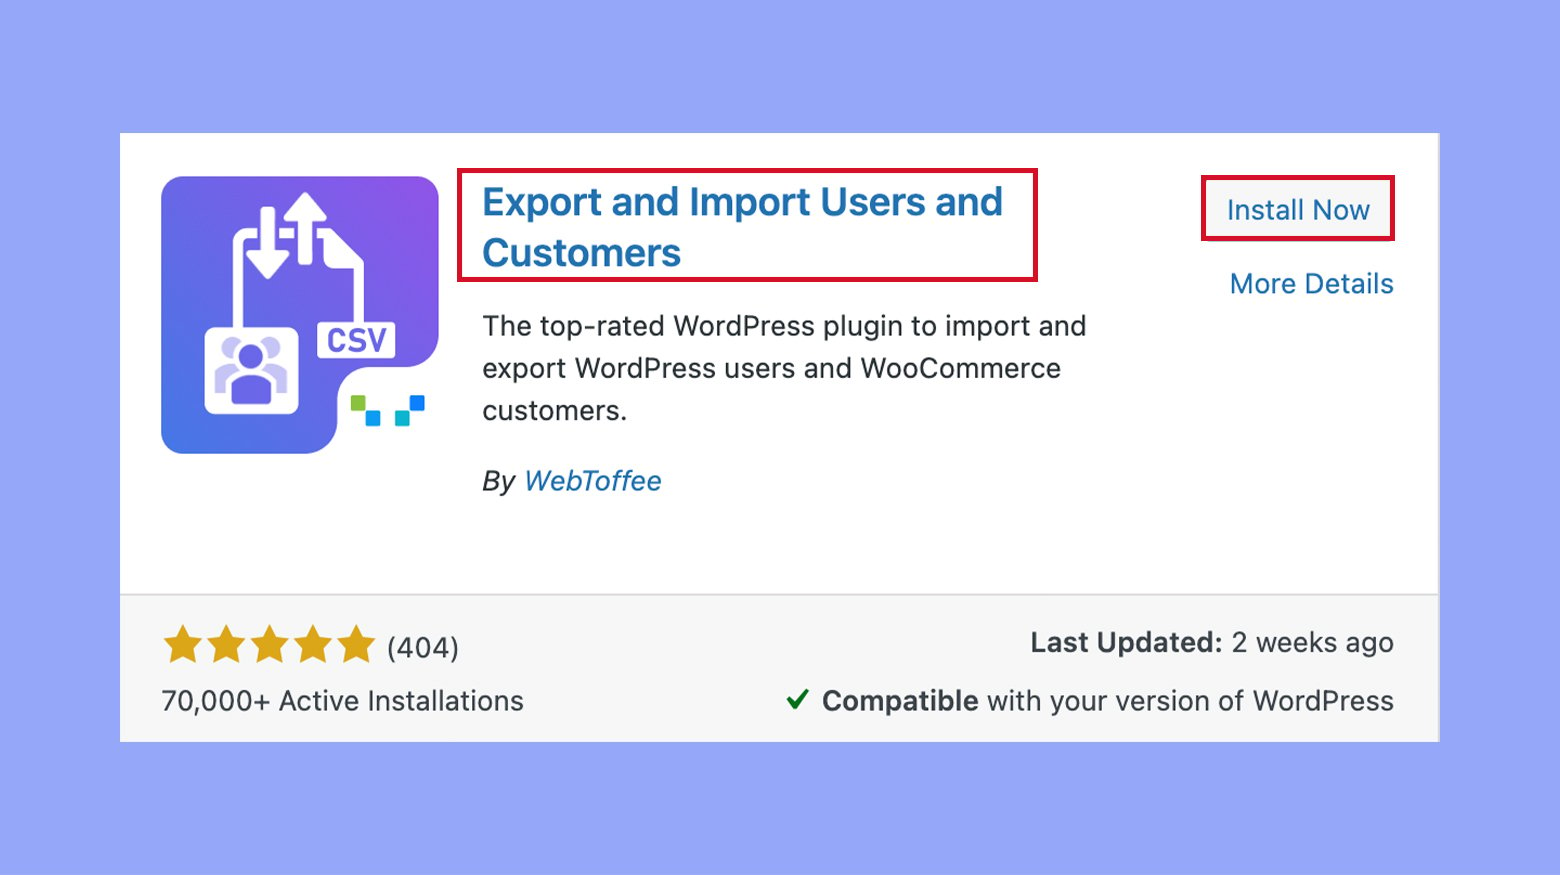 Installing the Export and import users and customers plugin